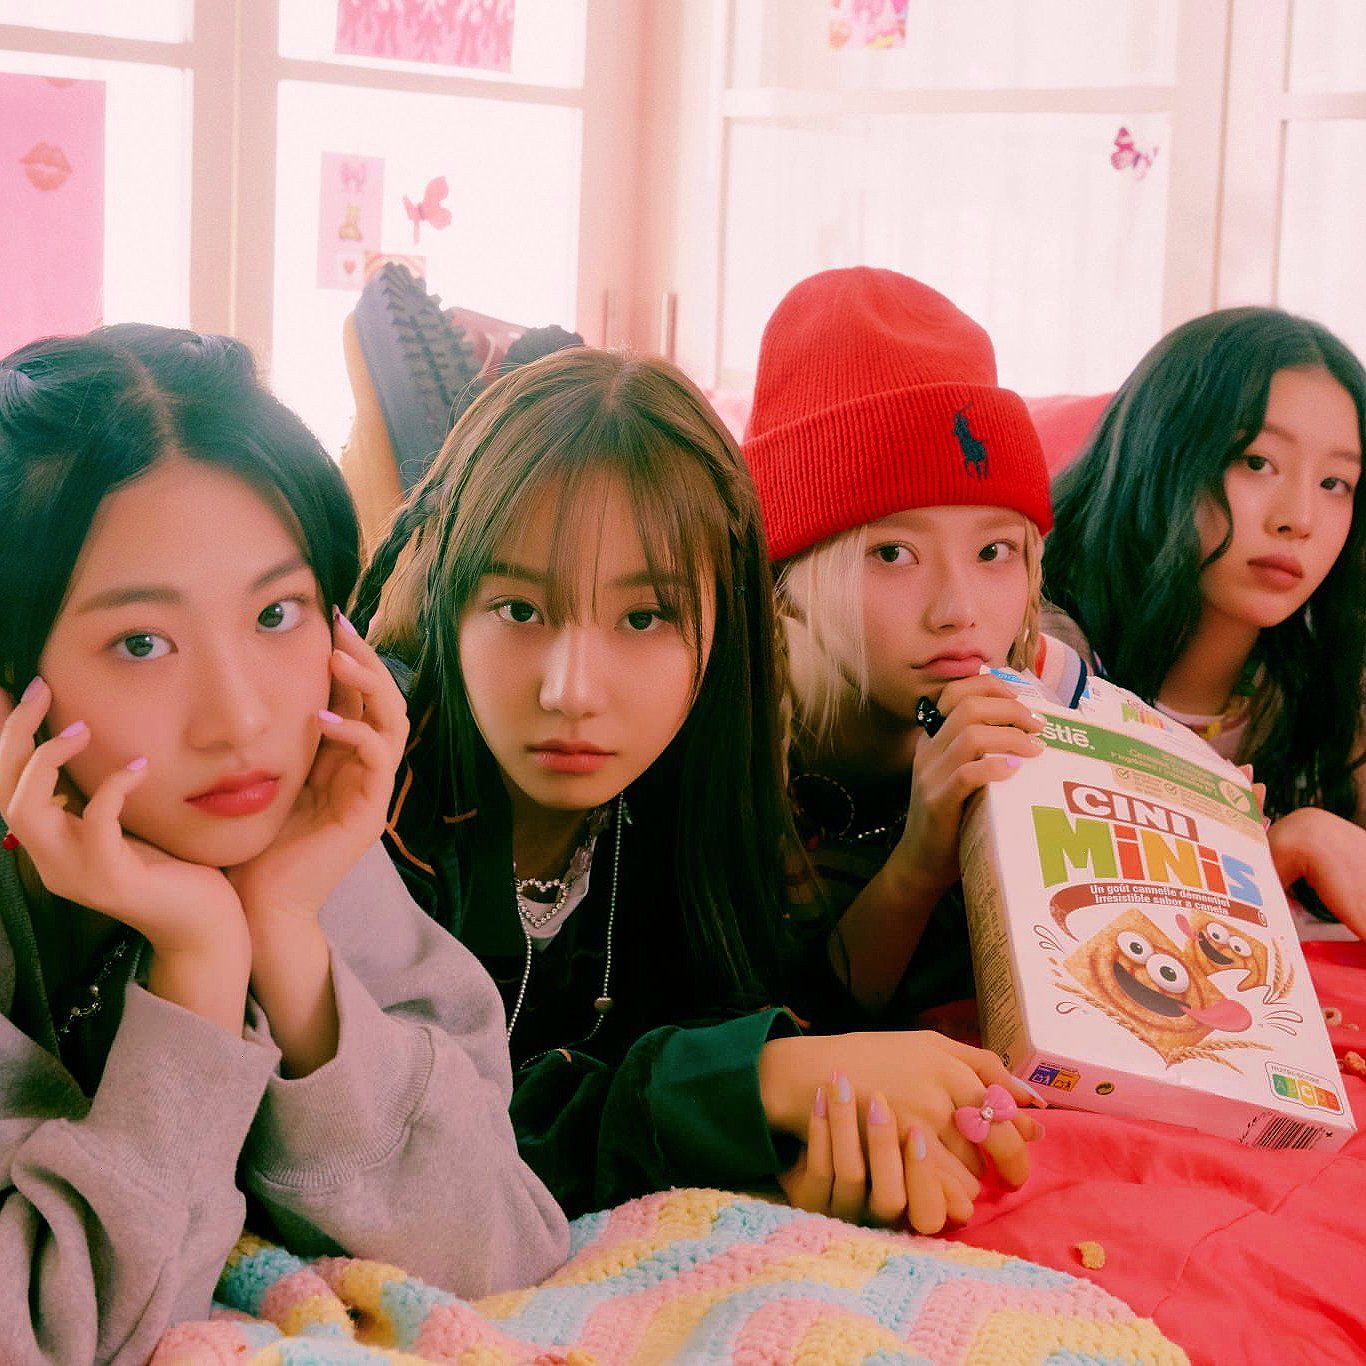 4 girls from the group GIdle sitting on a bed - FIFTY FIFTY